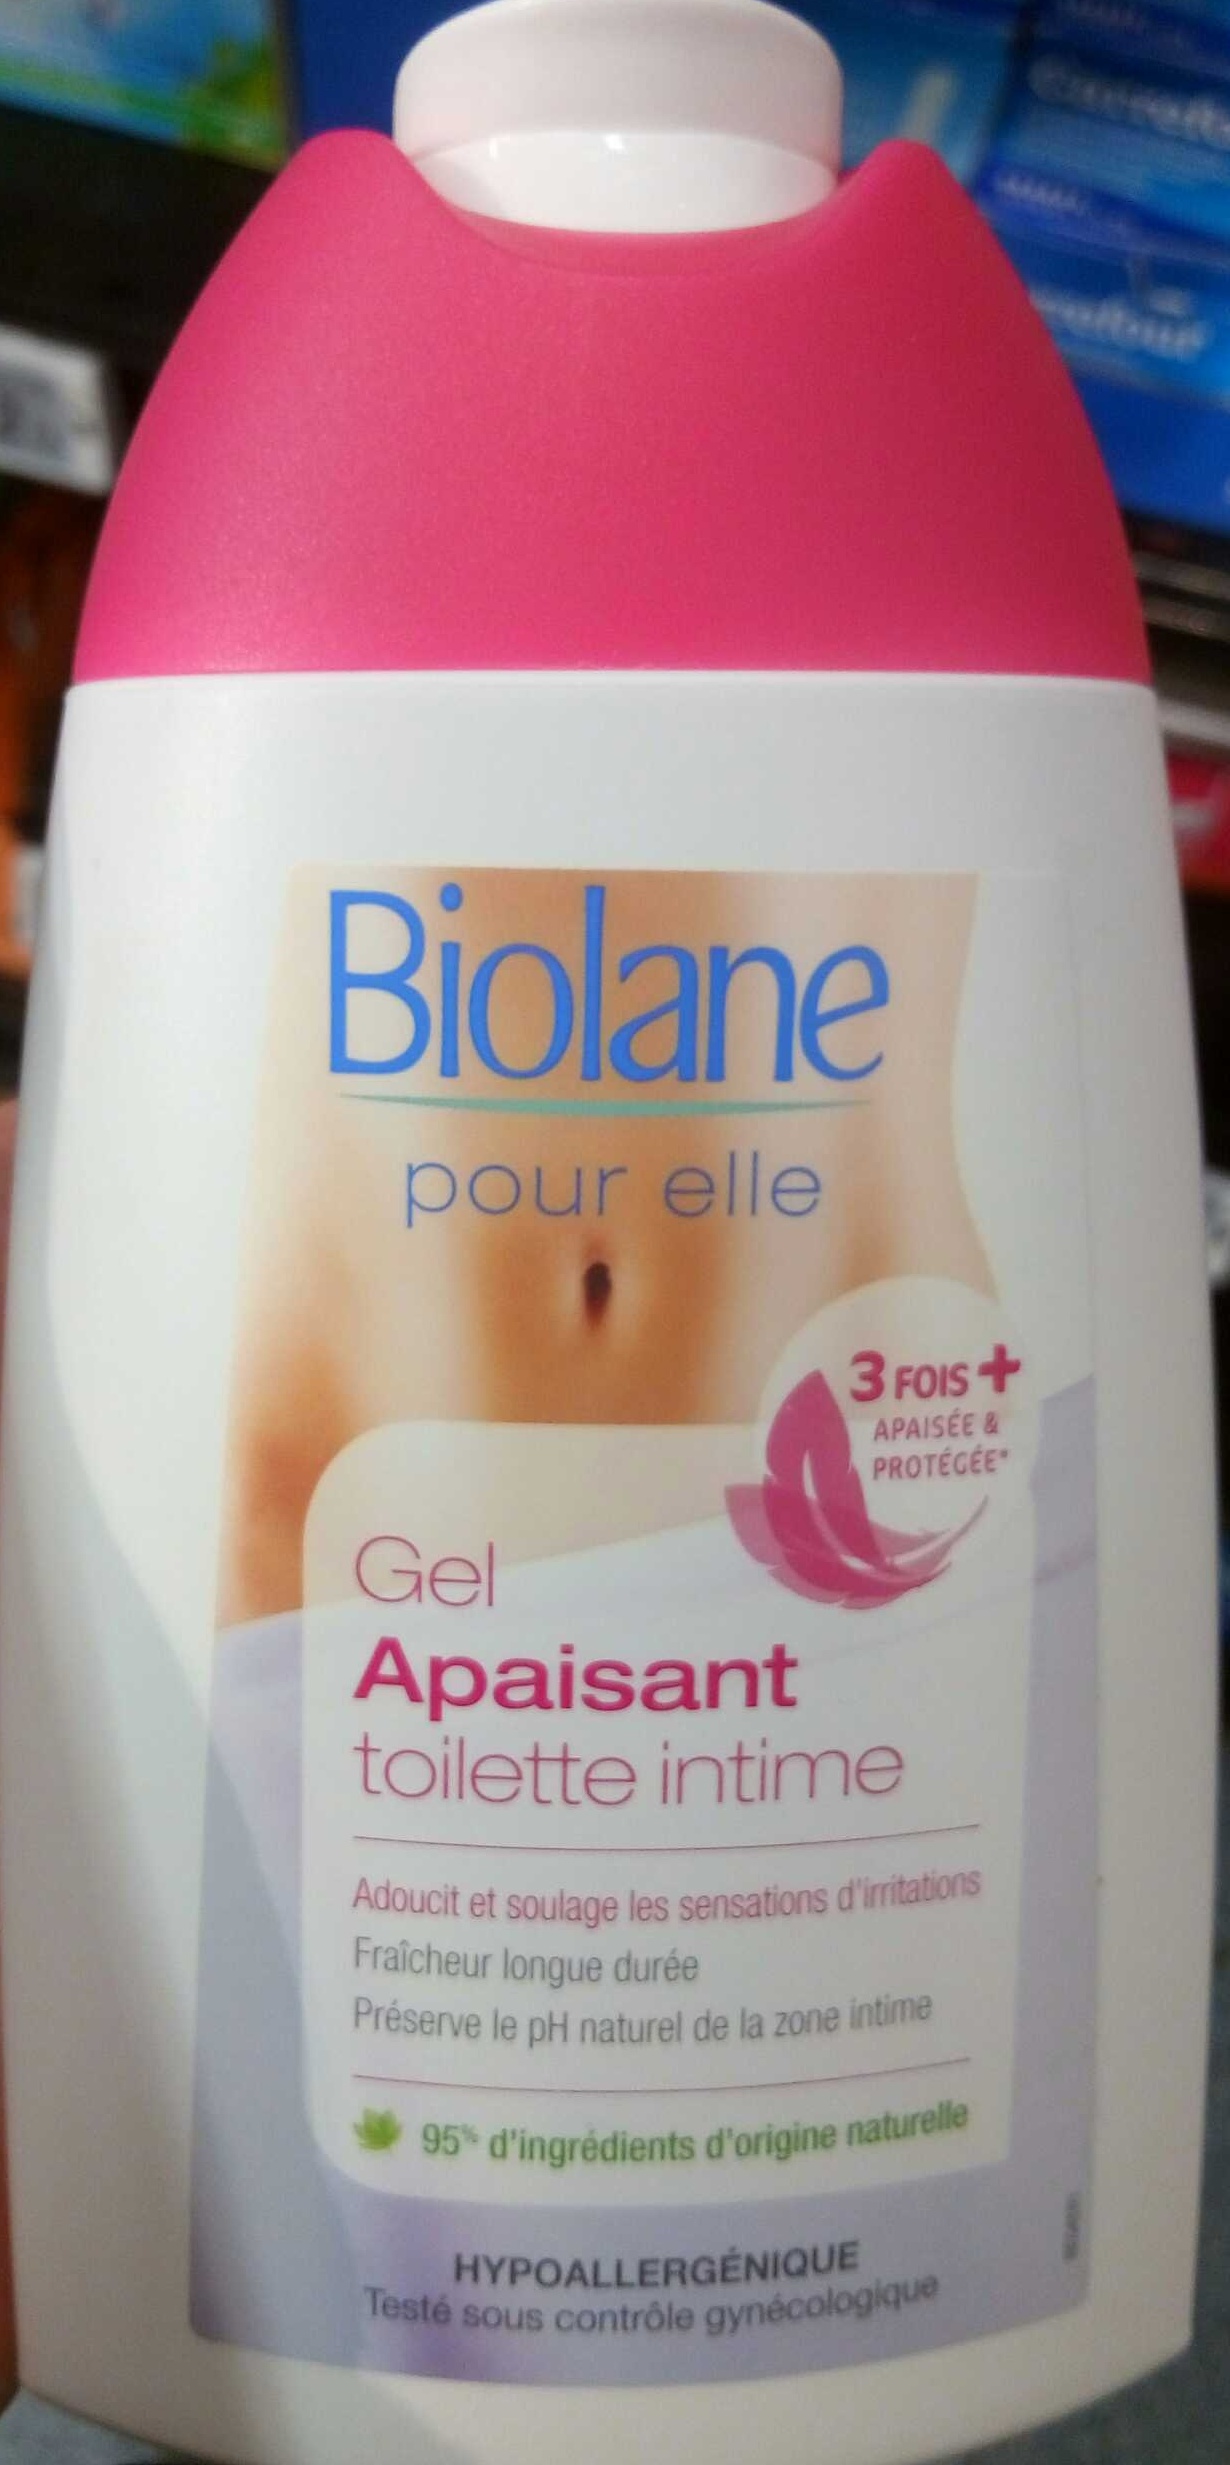 Gel apaisant toilette intime - Product - fr